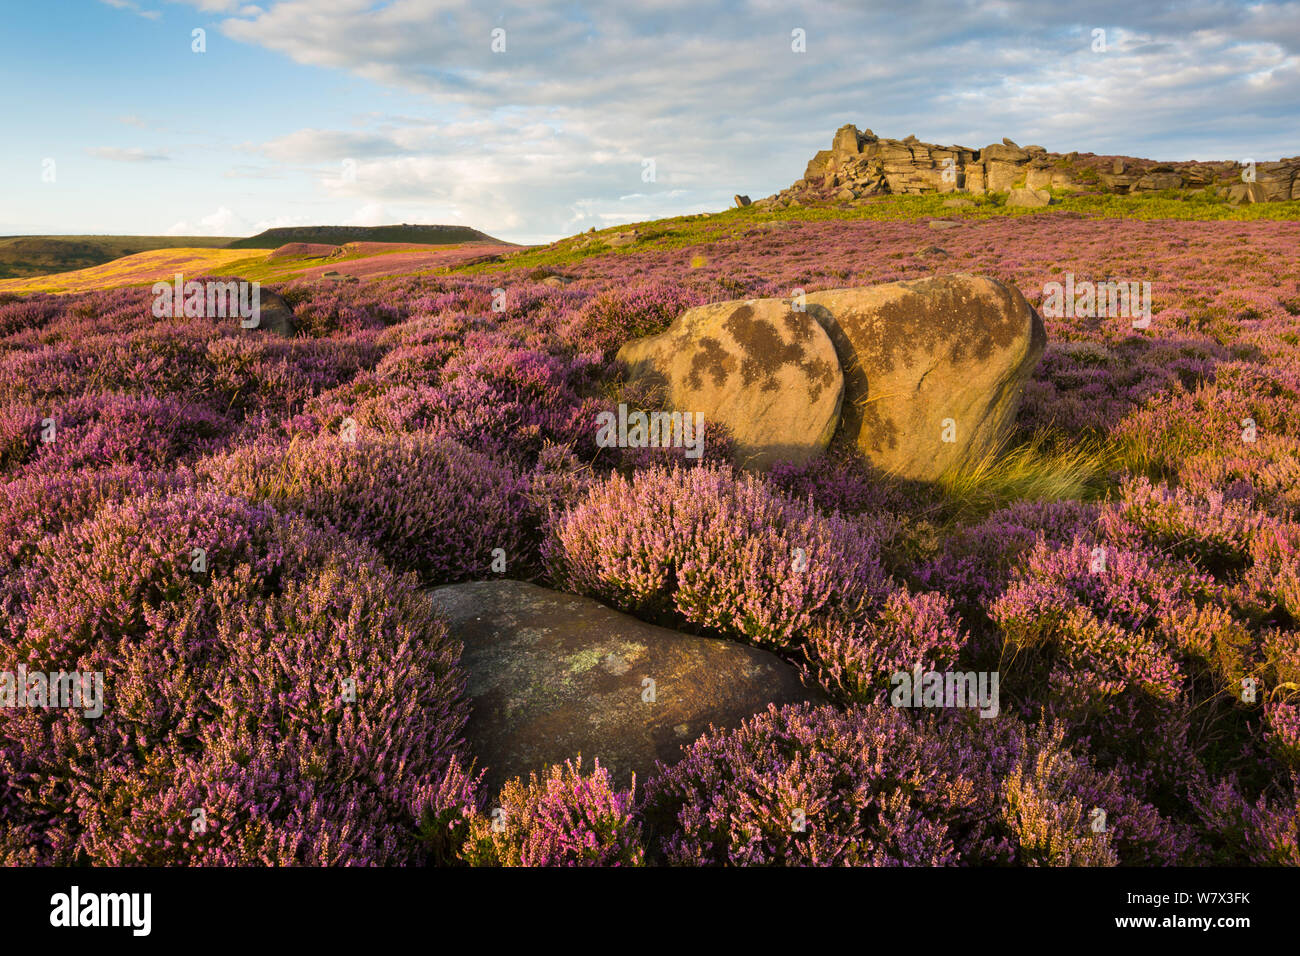 Owler Tor surrounded by ling heather (Calluna vulgaris) in full bloom. Peak District National Park, Derbyshire, UK. August. Stock Photo